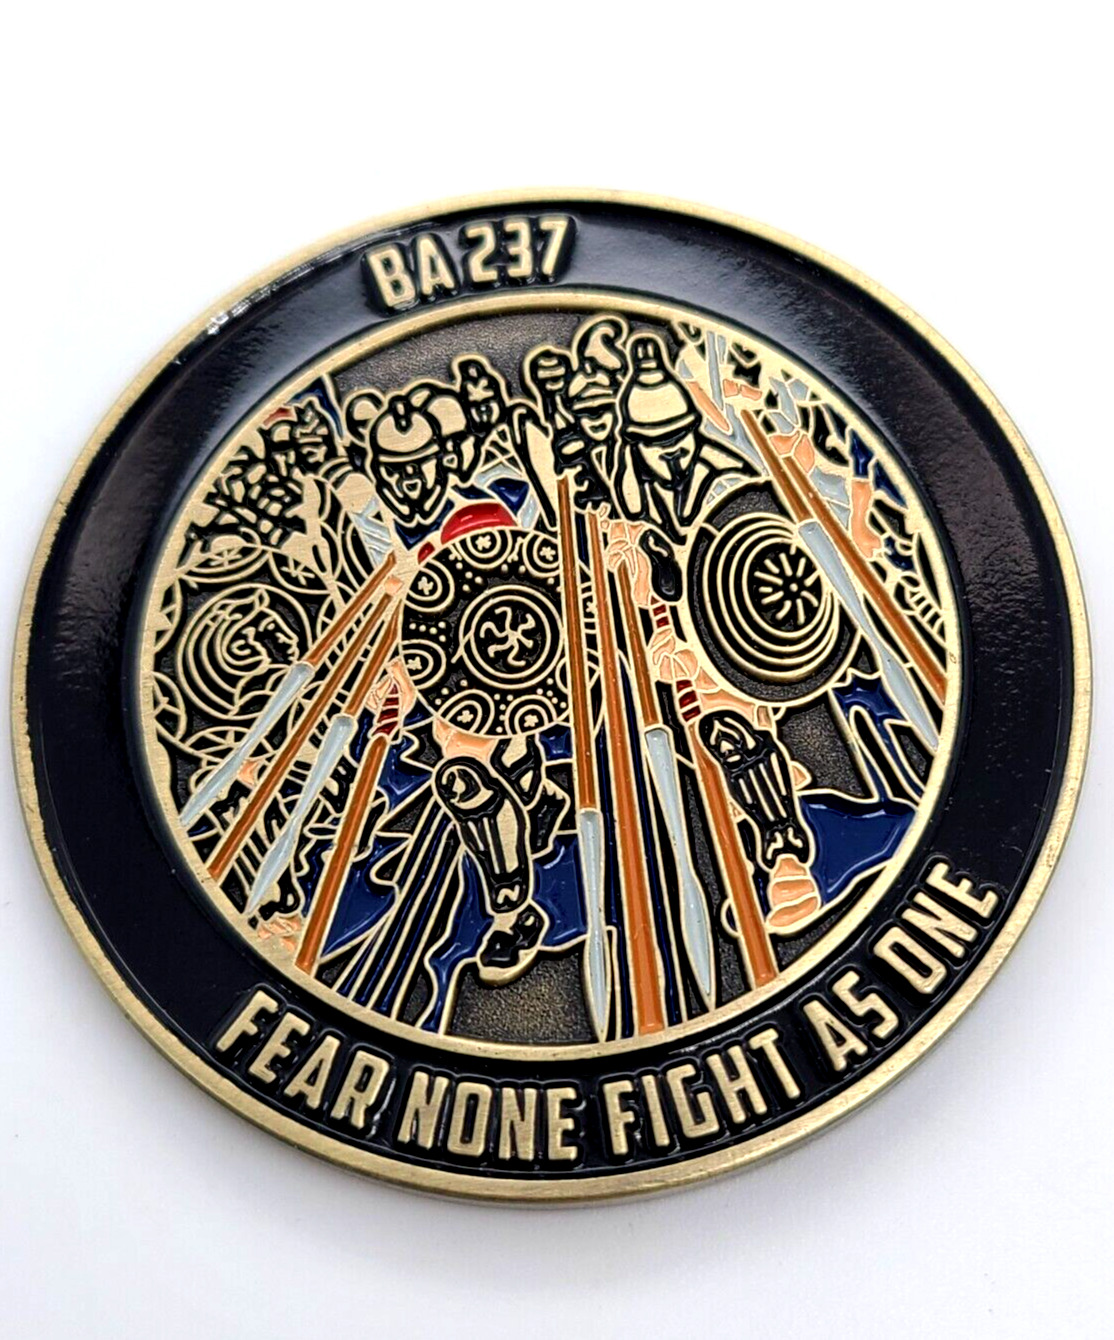 United States DEA Special Agency BA 237 Fear None Fight As One Challenge Coin